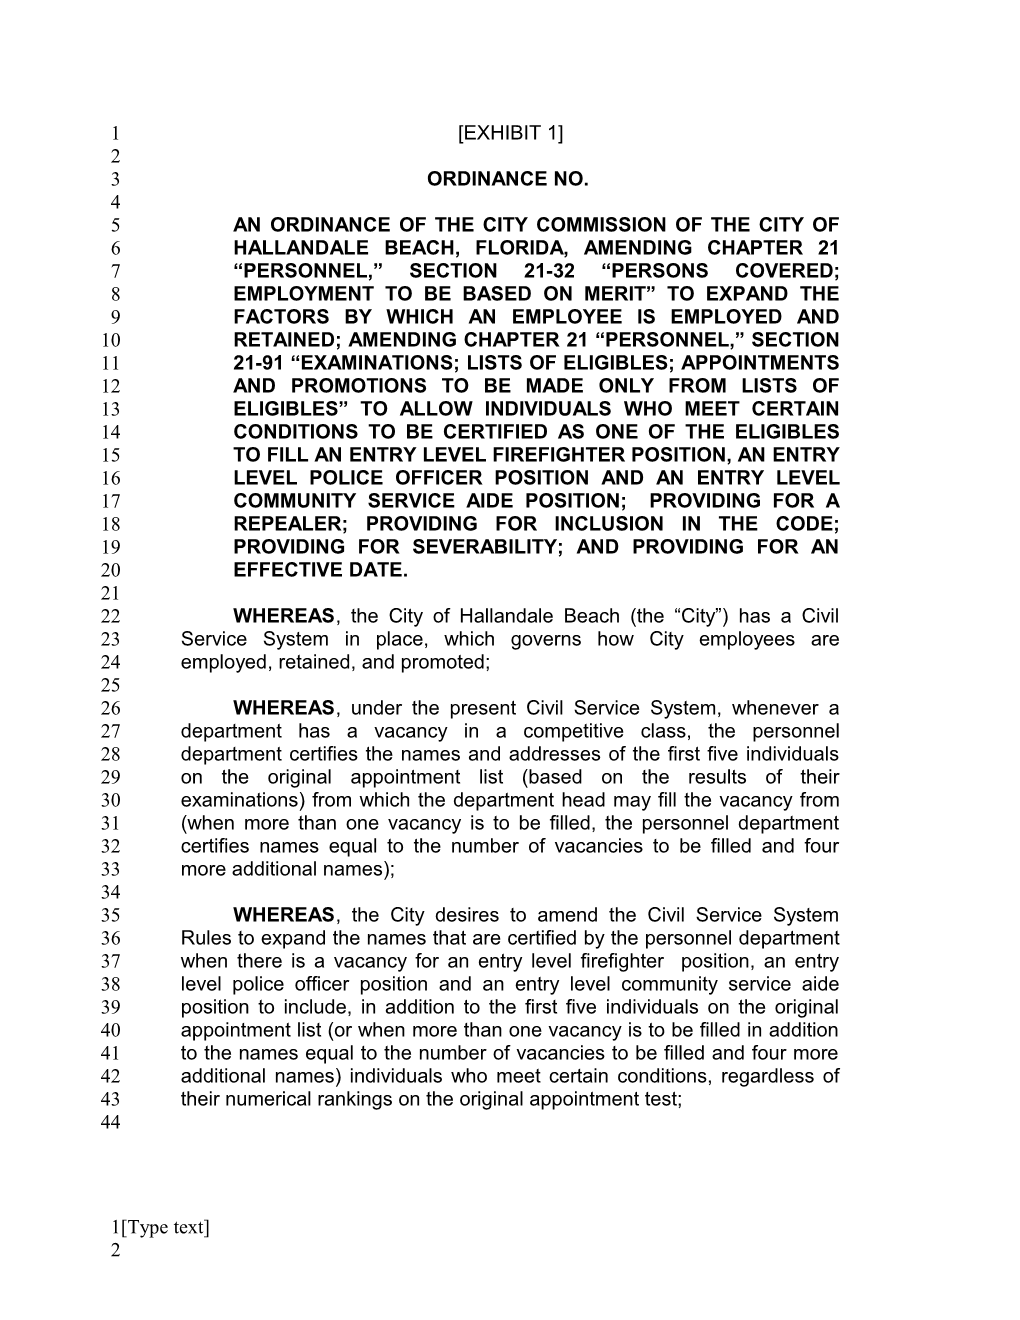 An Ordinance of the City Commission of the City of Hallandale Beach, Florida, Amending